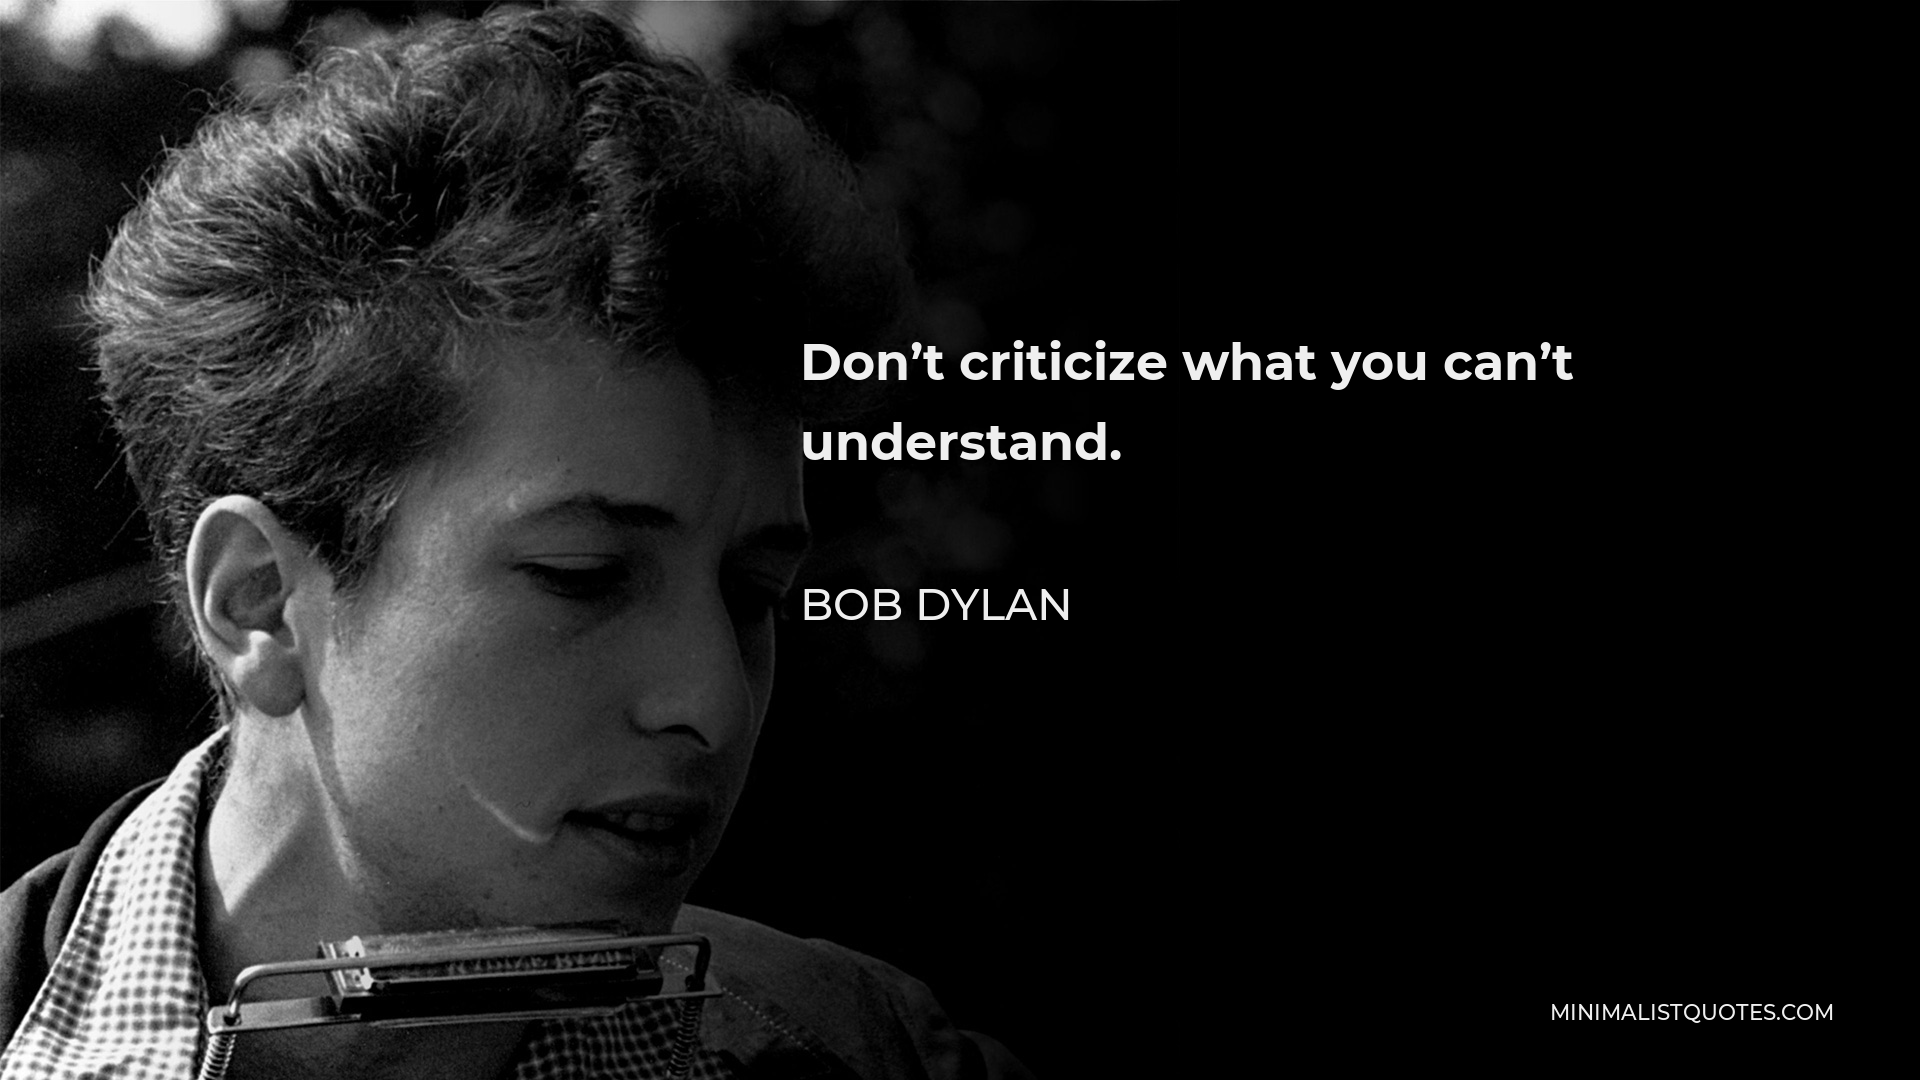 Bob Dylan Quote - Don’t criticize what you can’t understand.